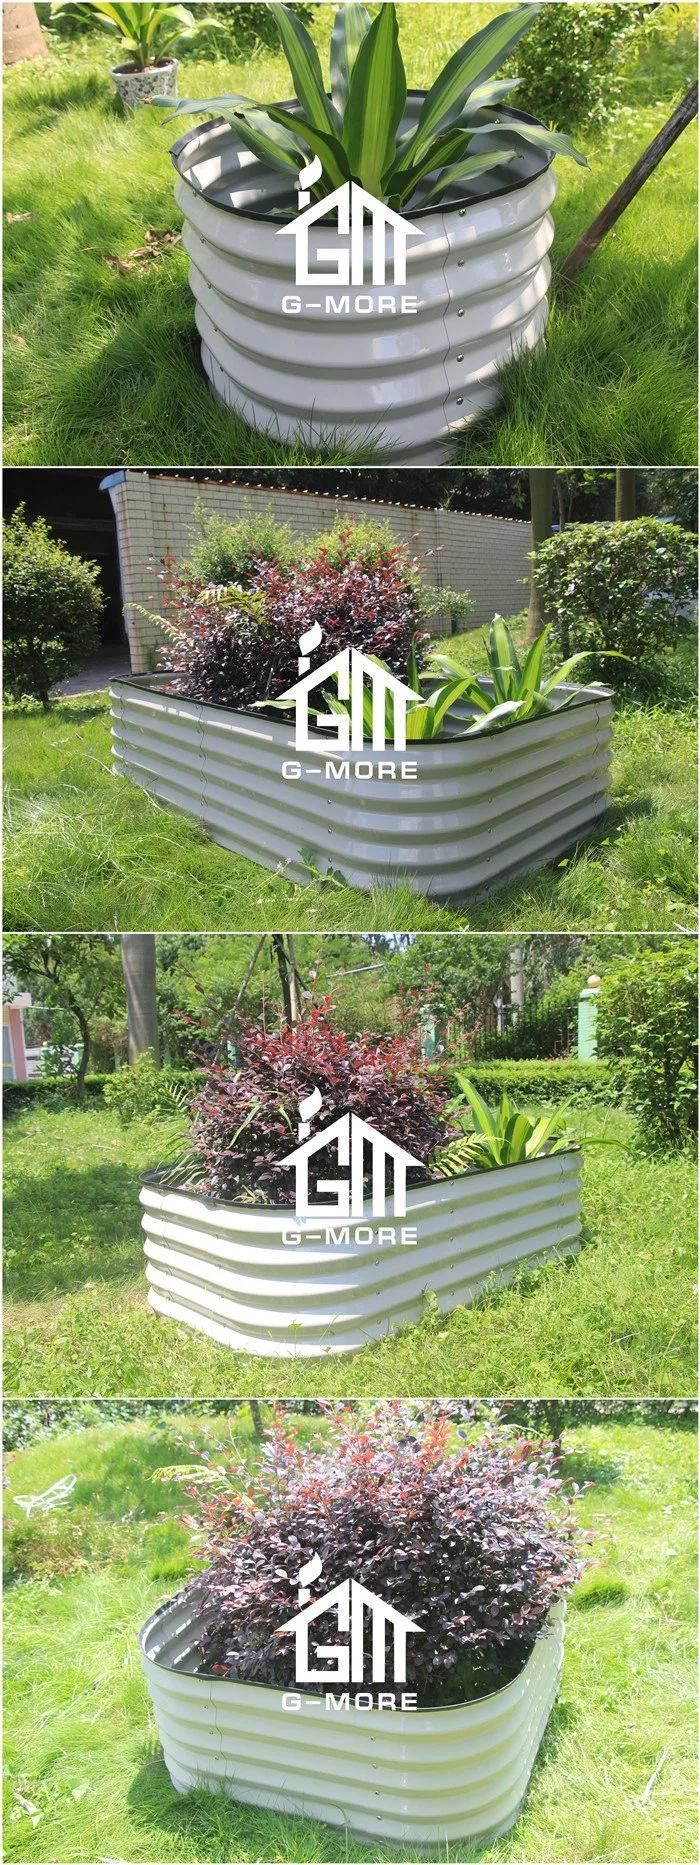 Oval Powder Coated Galvanized Planter for Growing Vegetable Raised Garden Beds